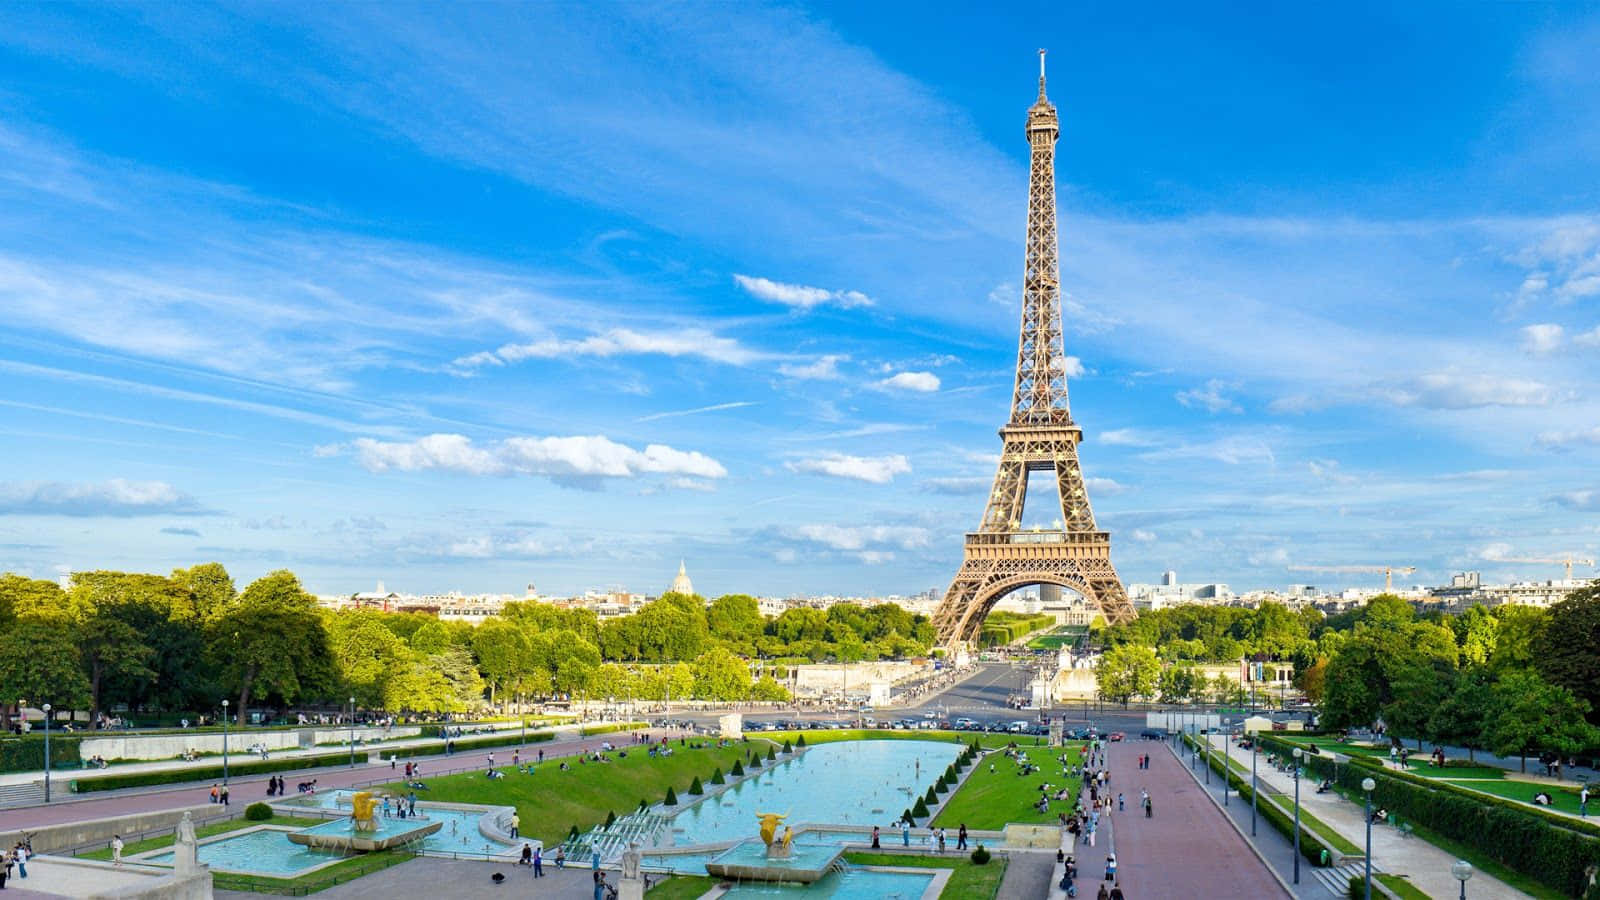 The Eiffel Tower Is Seen In The Background Wallpaper